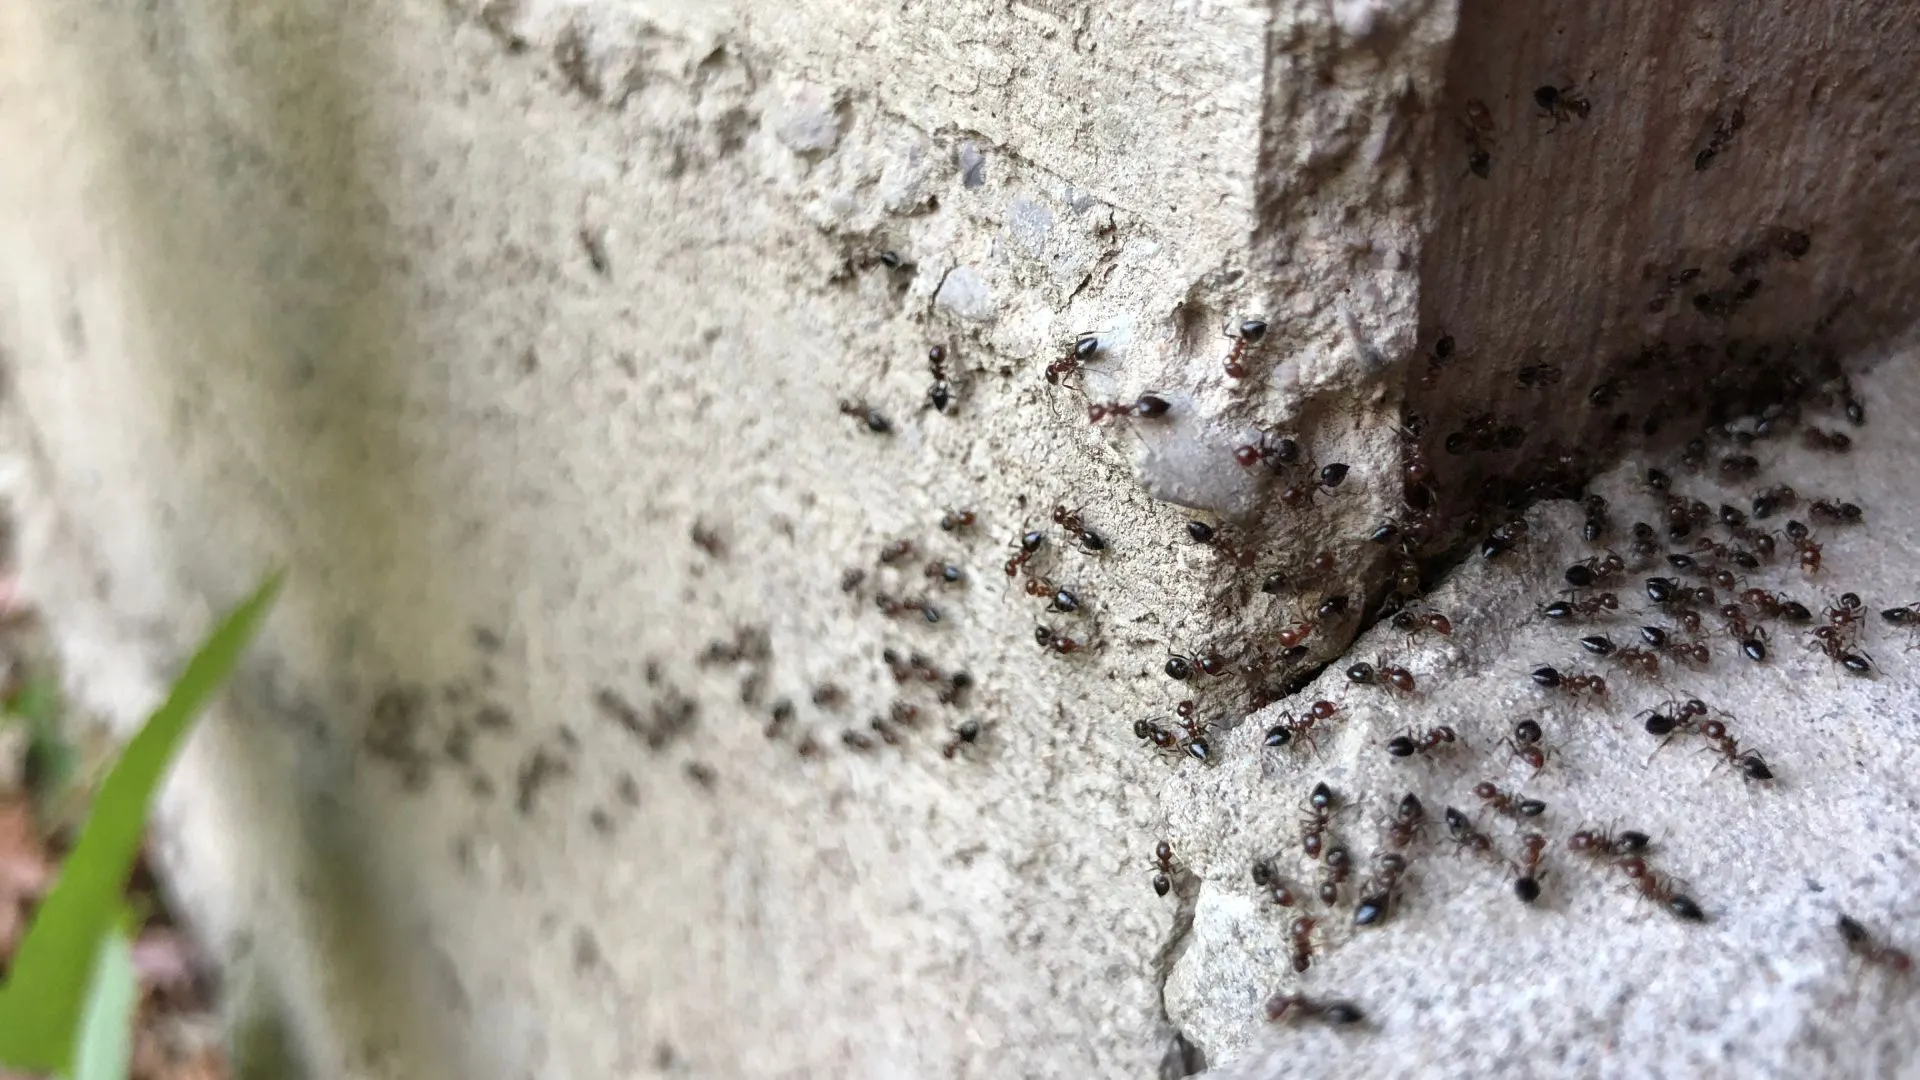 Infestation of ants entering home in The Colony, TX.